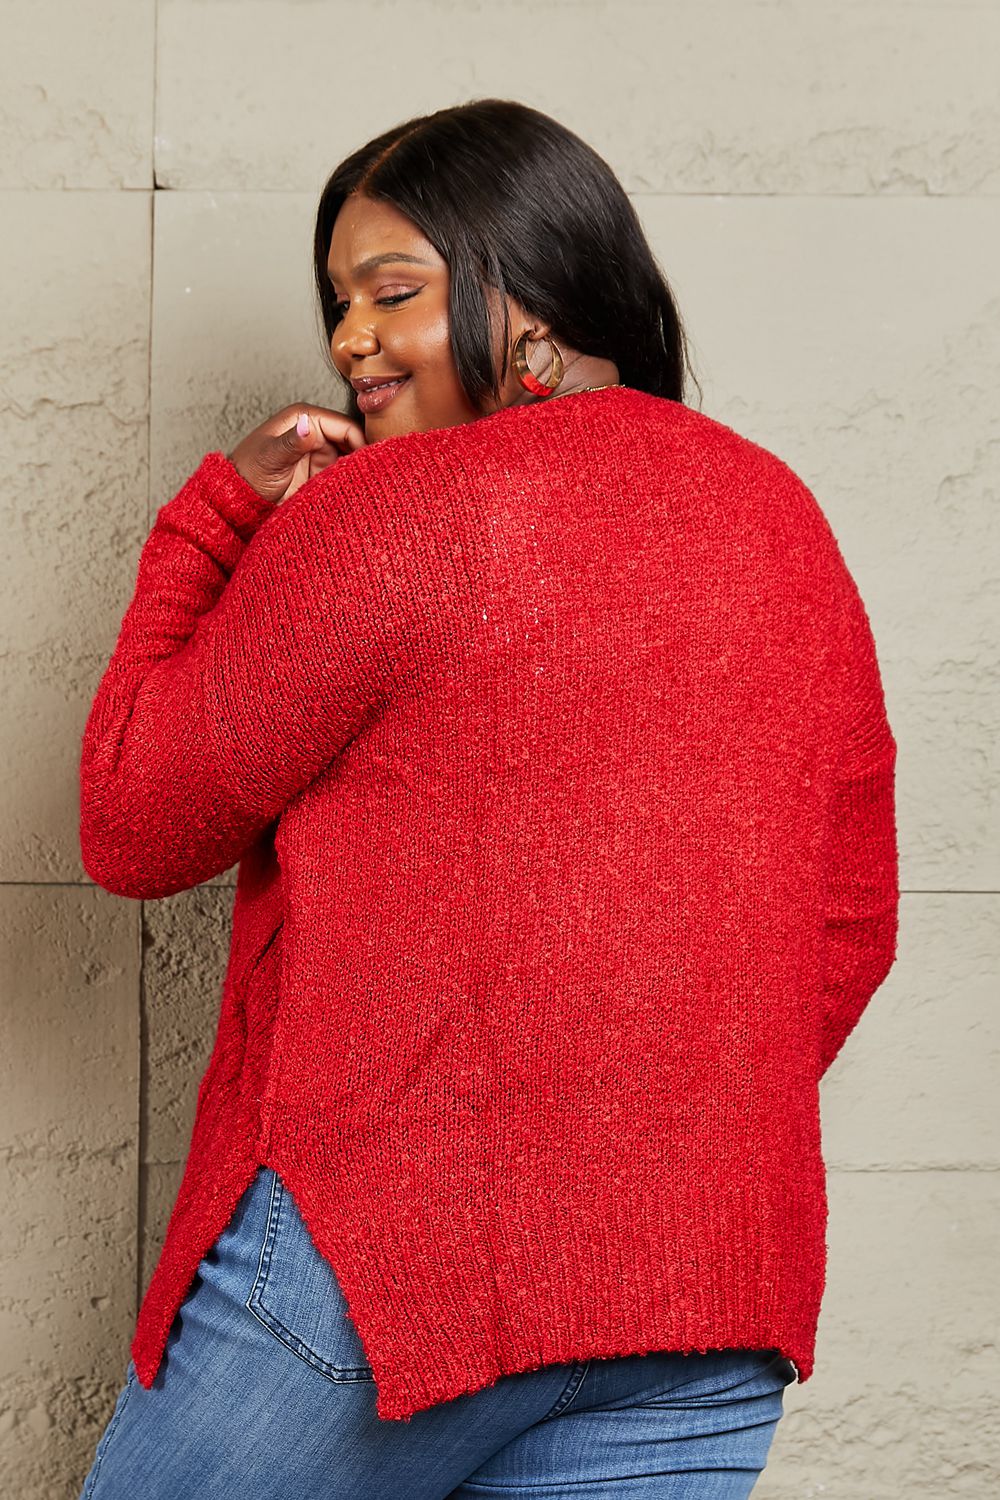 Heimish By The Fire Full Size Draped Detail Knit Sweater-Sweaters/Sweatshirts-Inspired by Justeen-Women's Clothing Boutique in Chicago, Illinois